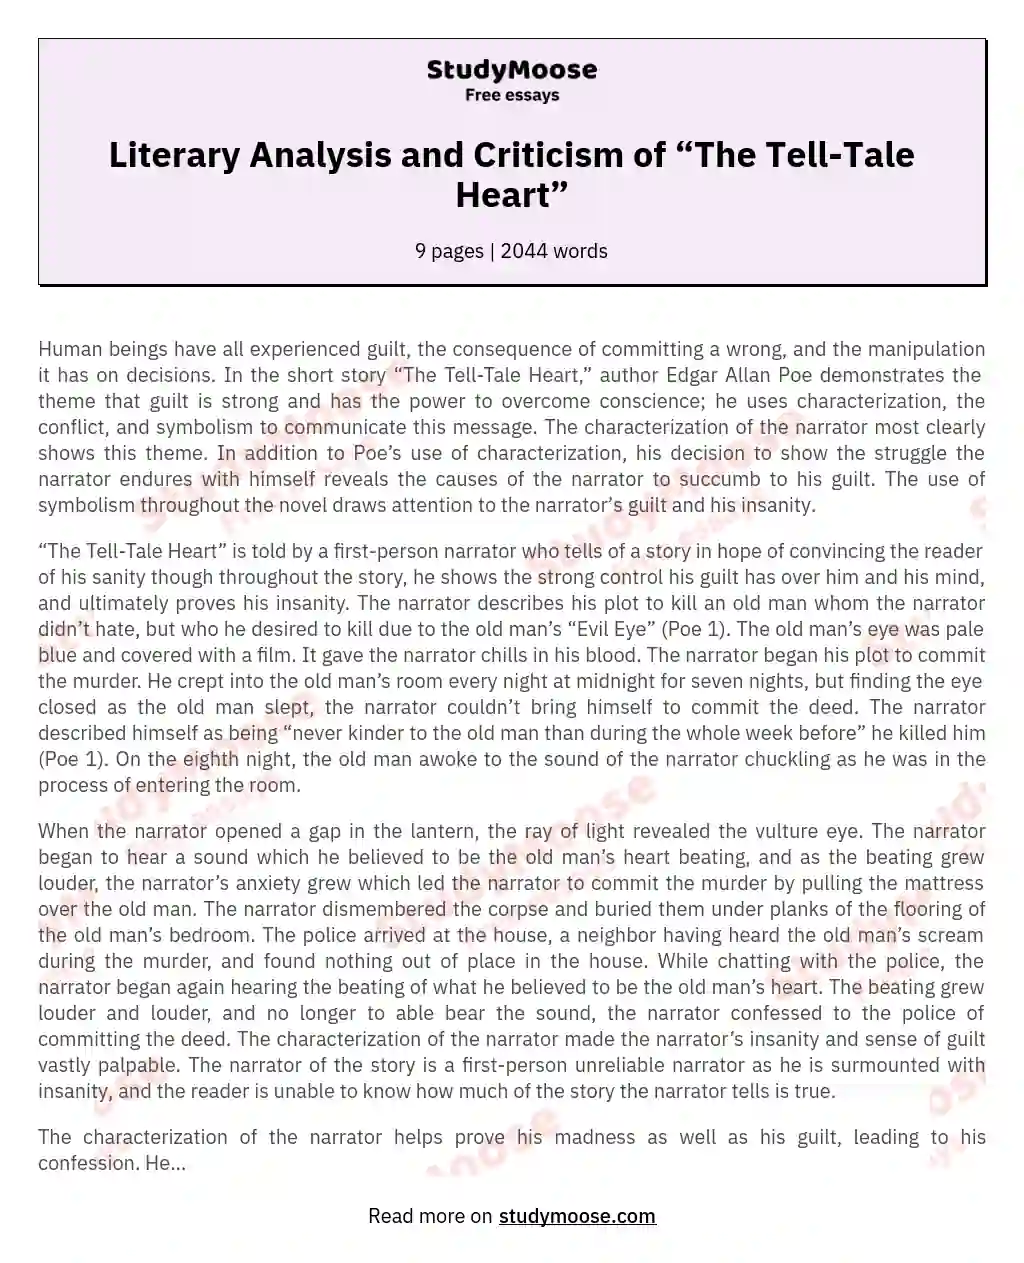 Literary Analysis and Criticism of “The Tell-Tale Heart” essay